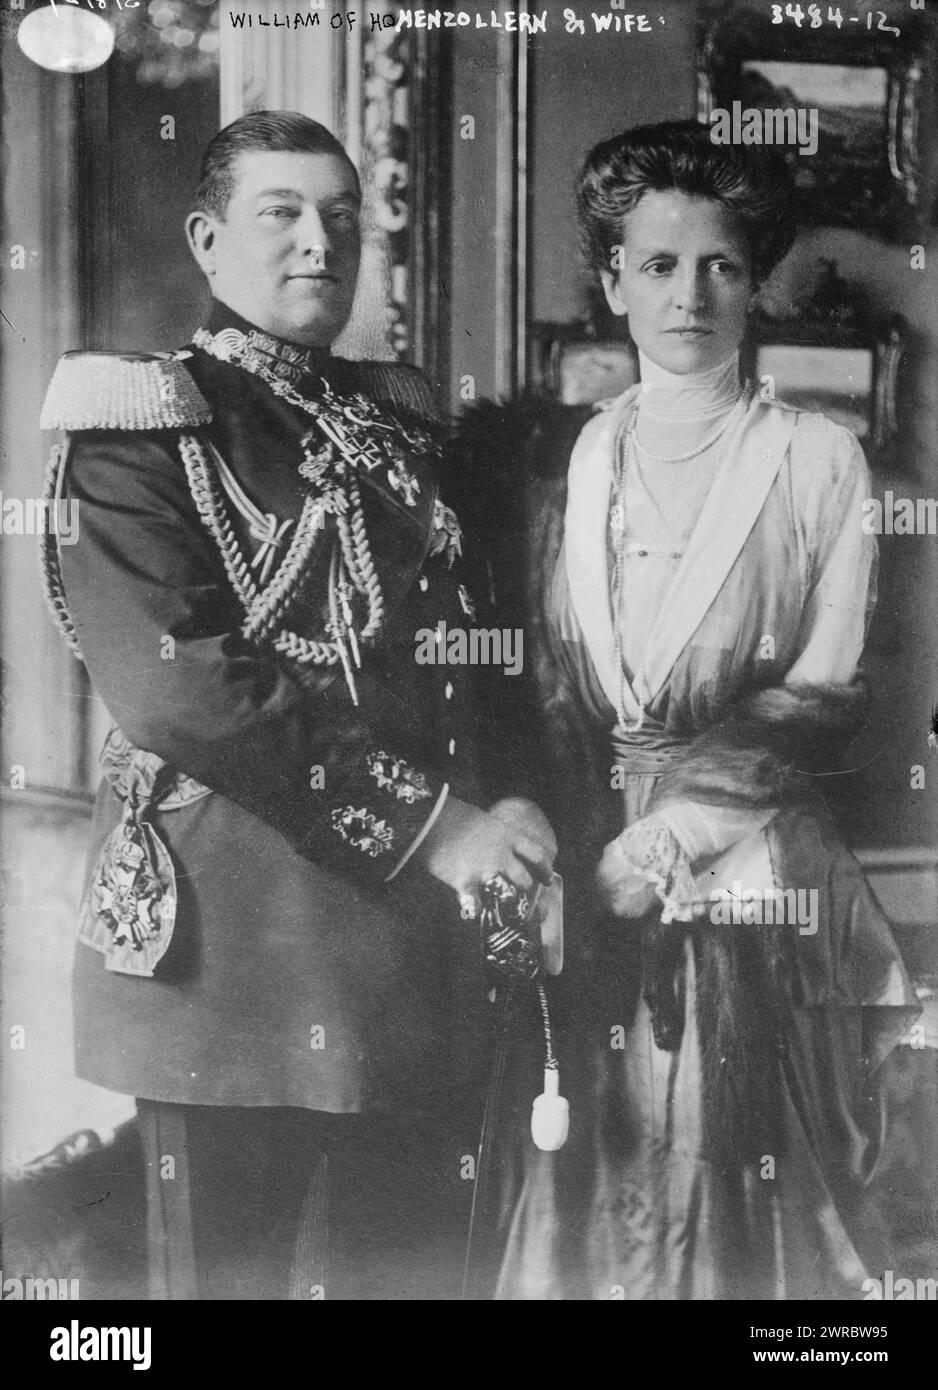 William of Hohenzollern and wife, Photograph shows William, Prince of Hohenzollern (1864-1927) and his wife Princess Adelgunde of Bavaria (1870-1958)., between ca. 1910 and ca. 1915, Glass negatives, 1 negative: glass Stock Photo